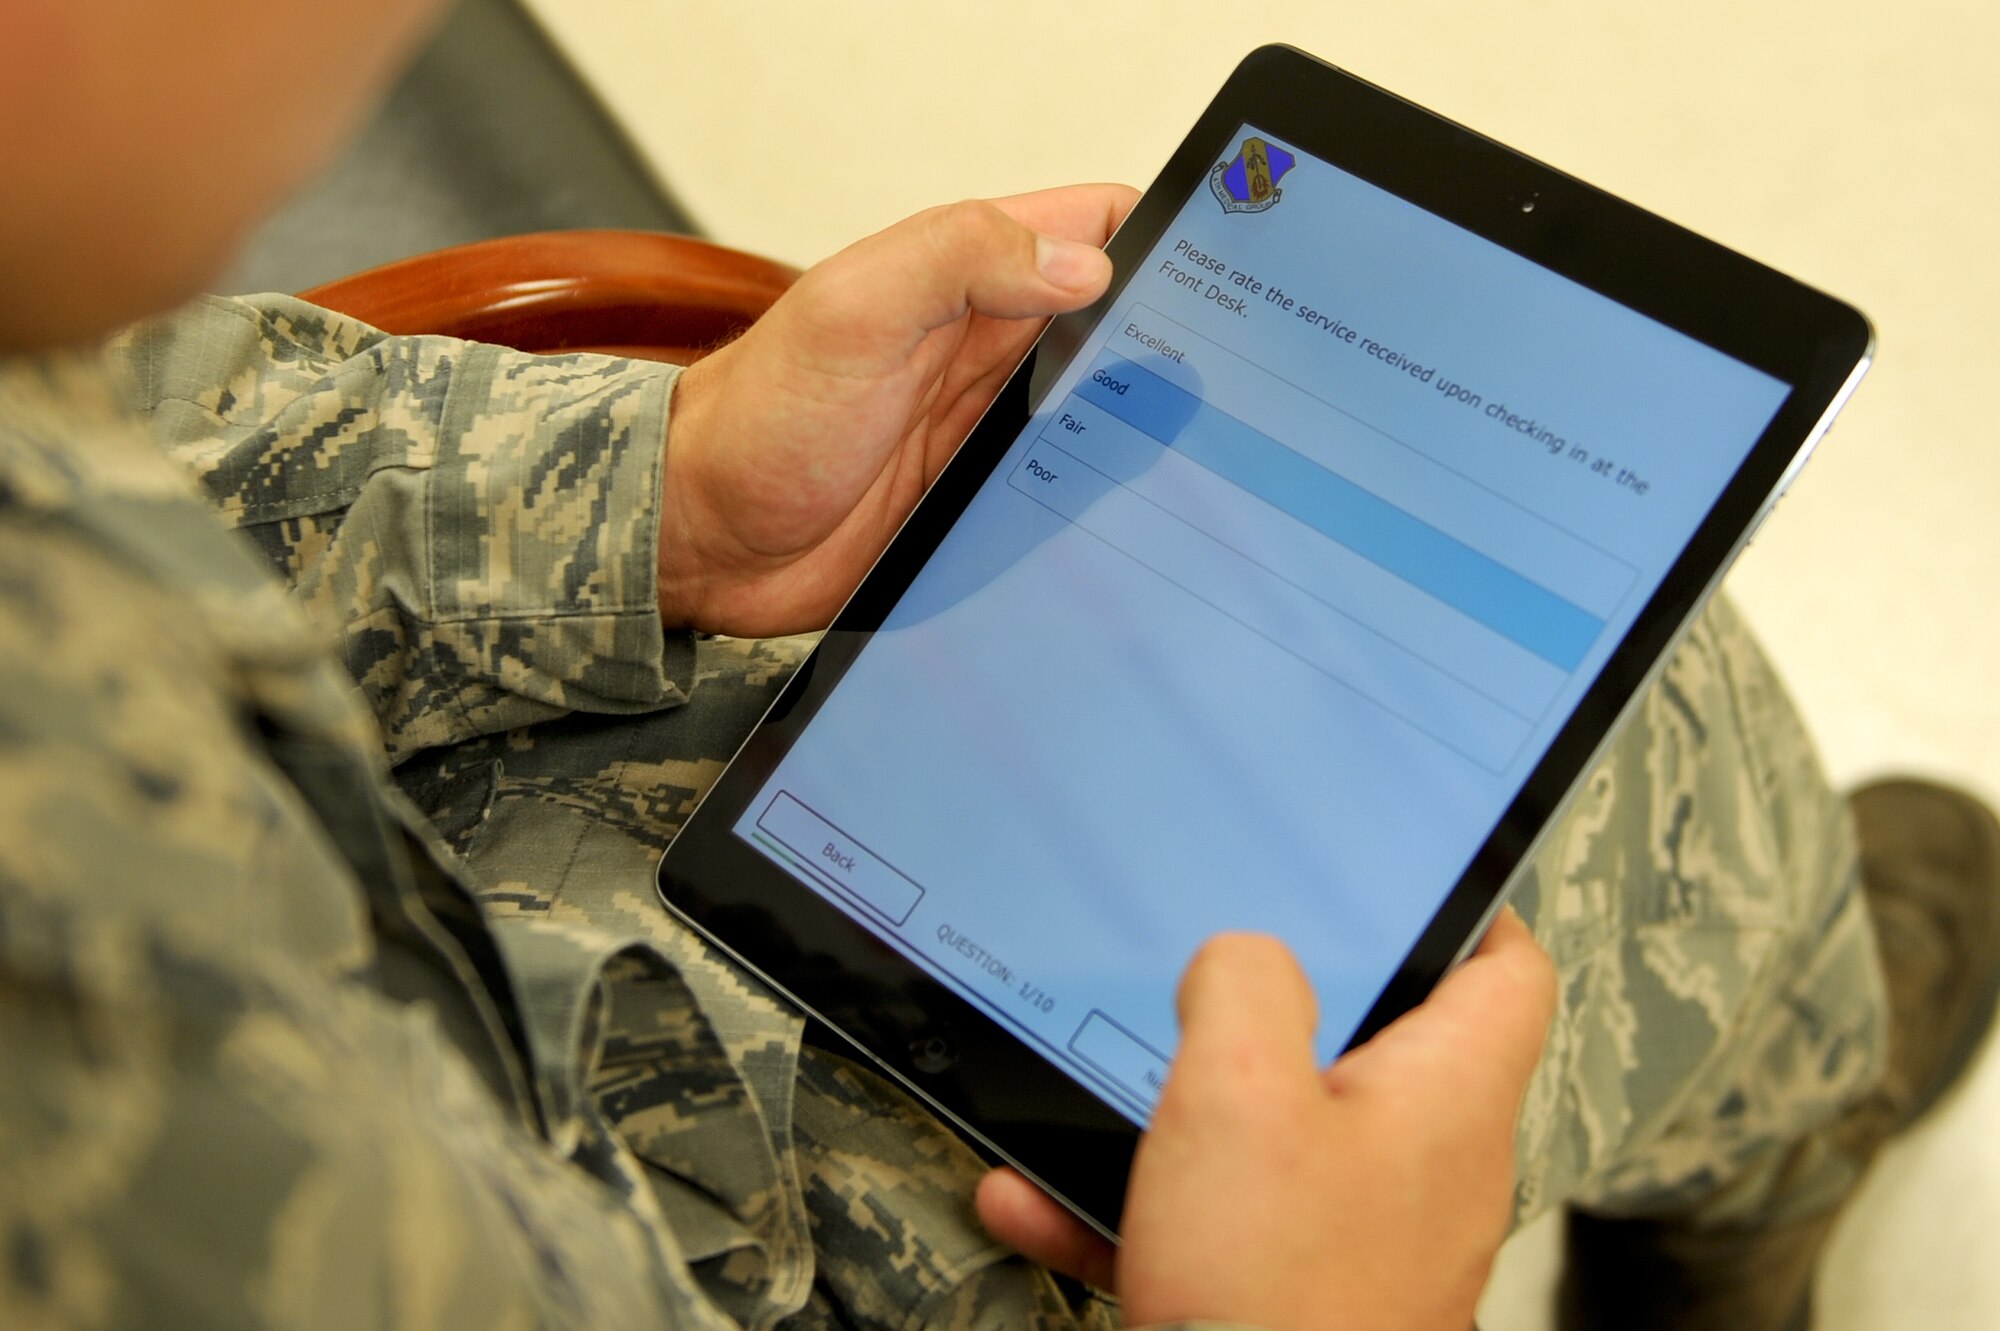 Senior Airman Donald Templeton, 4th Aircraft Maintenance Squadron load crew member, completes a survey after a medical appointment July 2, 2014, at Seymour Johnson Air Force Base, North Carolina. The 4th Medical Group is testing a new tablet-based customer survey app to provide consumer friendly, real-time feedback with a survey adaptable to fit group needs. (U.S. Air Force photo/Airman 1st Class Aaron J. Jenne)